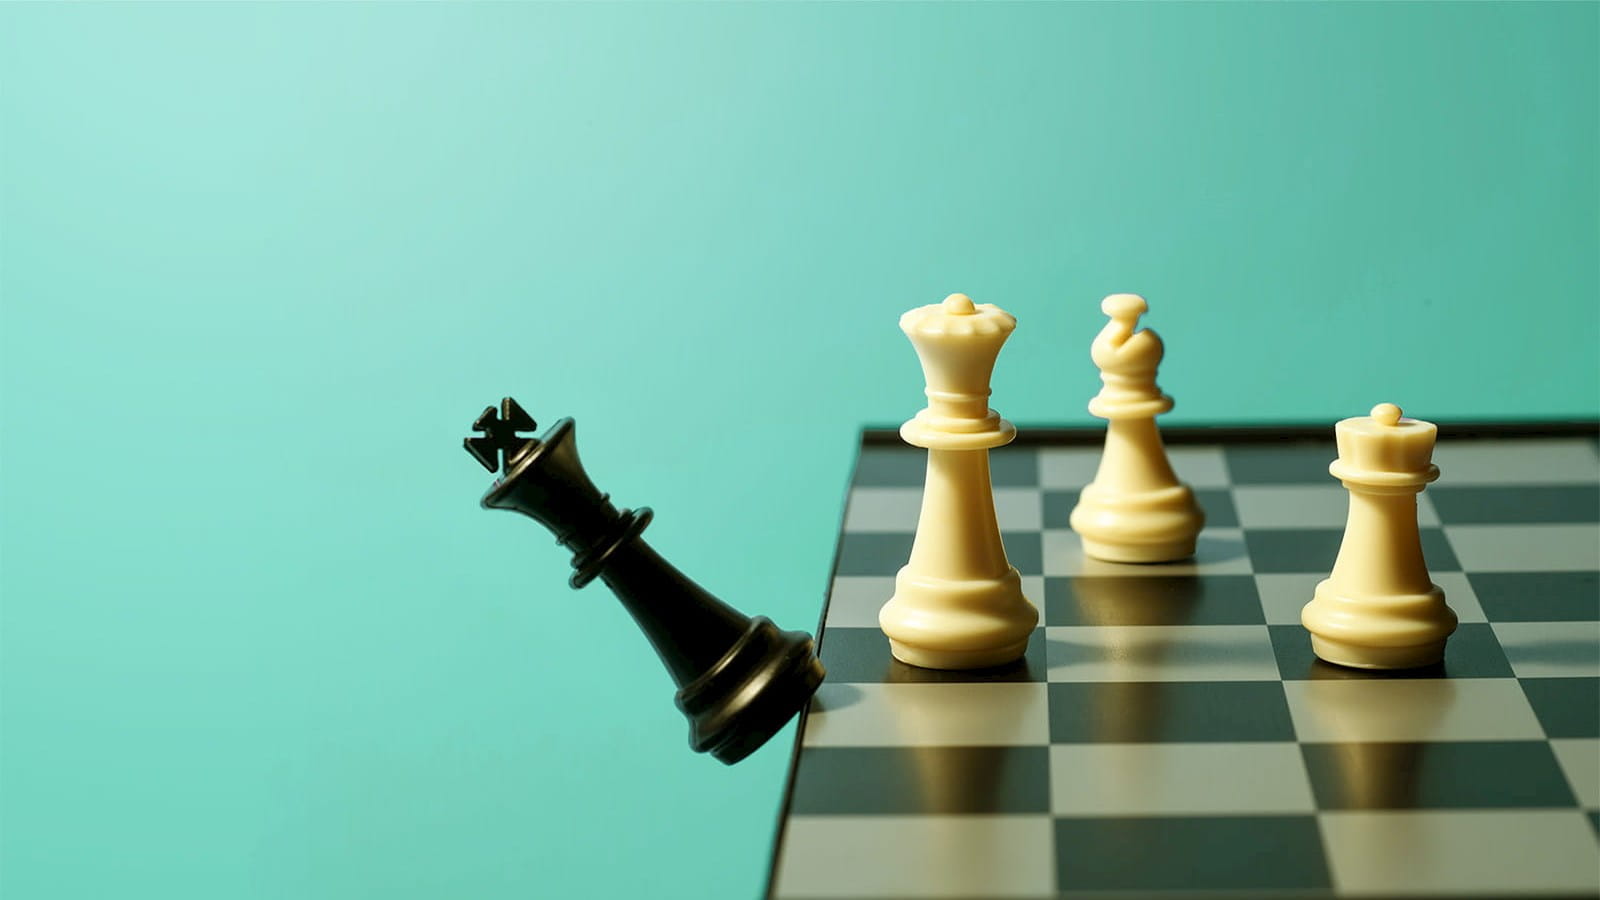 chess pieces board falling teal ICAEW audit scepticism